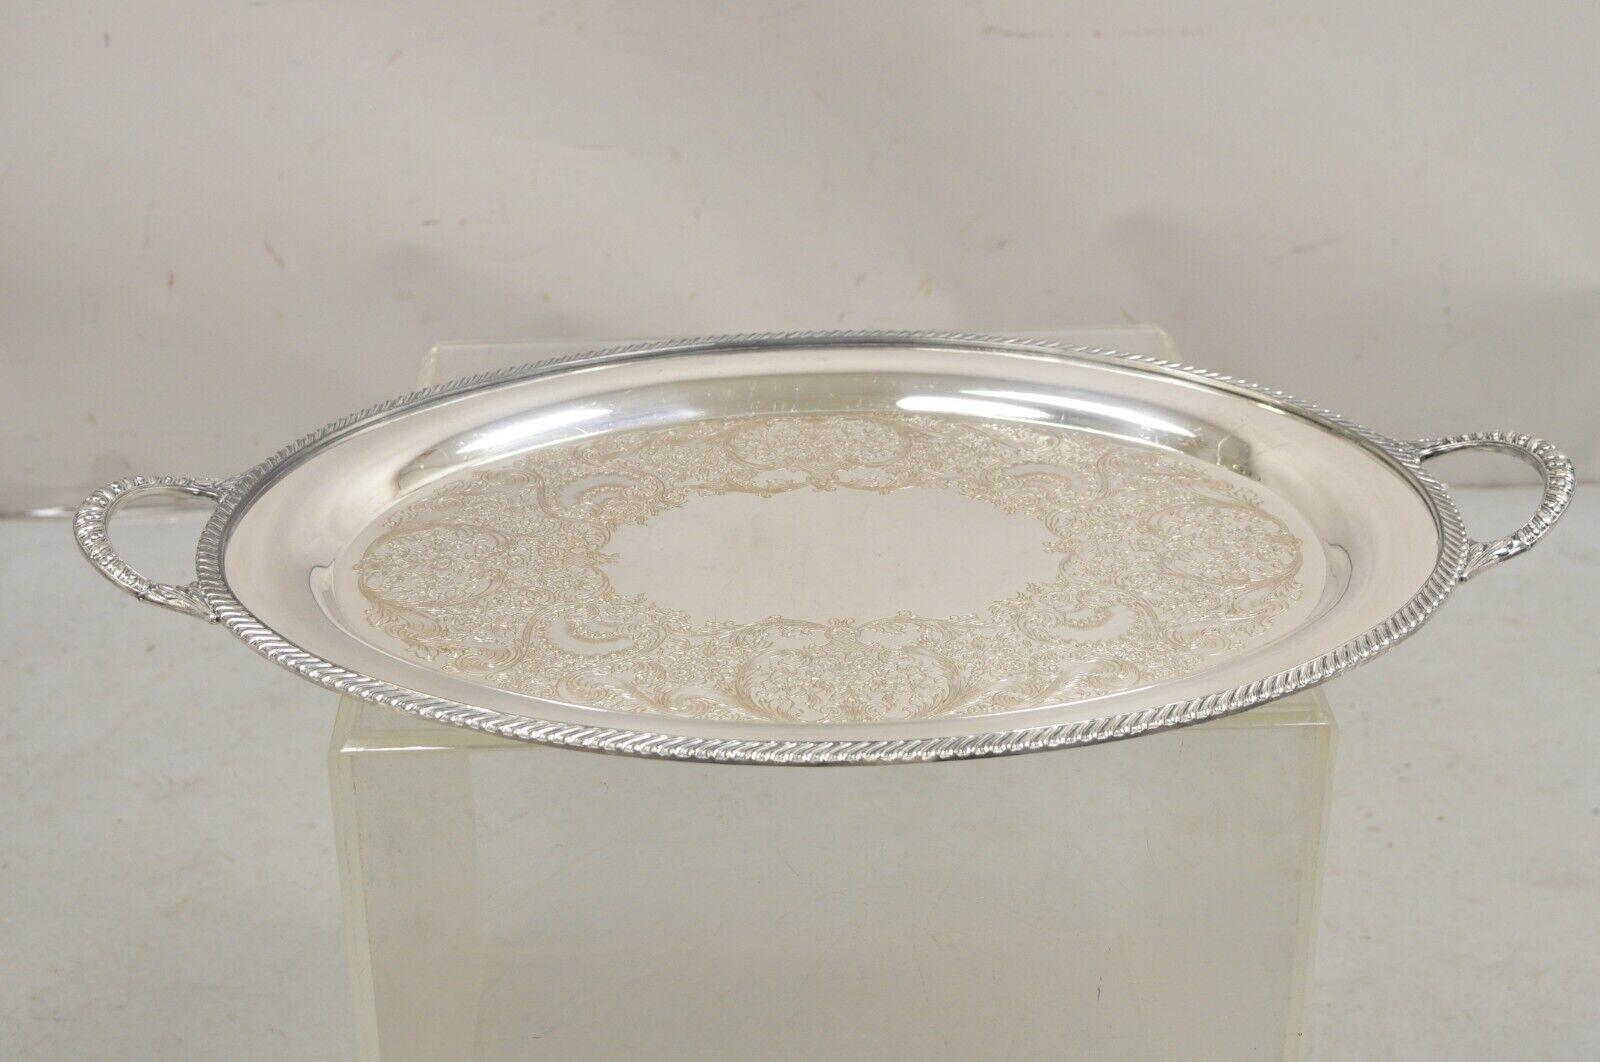 Vintage WM Rogers 4082 Silver Plated Victorian Oval Serving Platter Tray. Circa Mid 20th Century. Measurements: 1